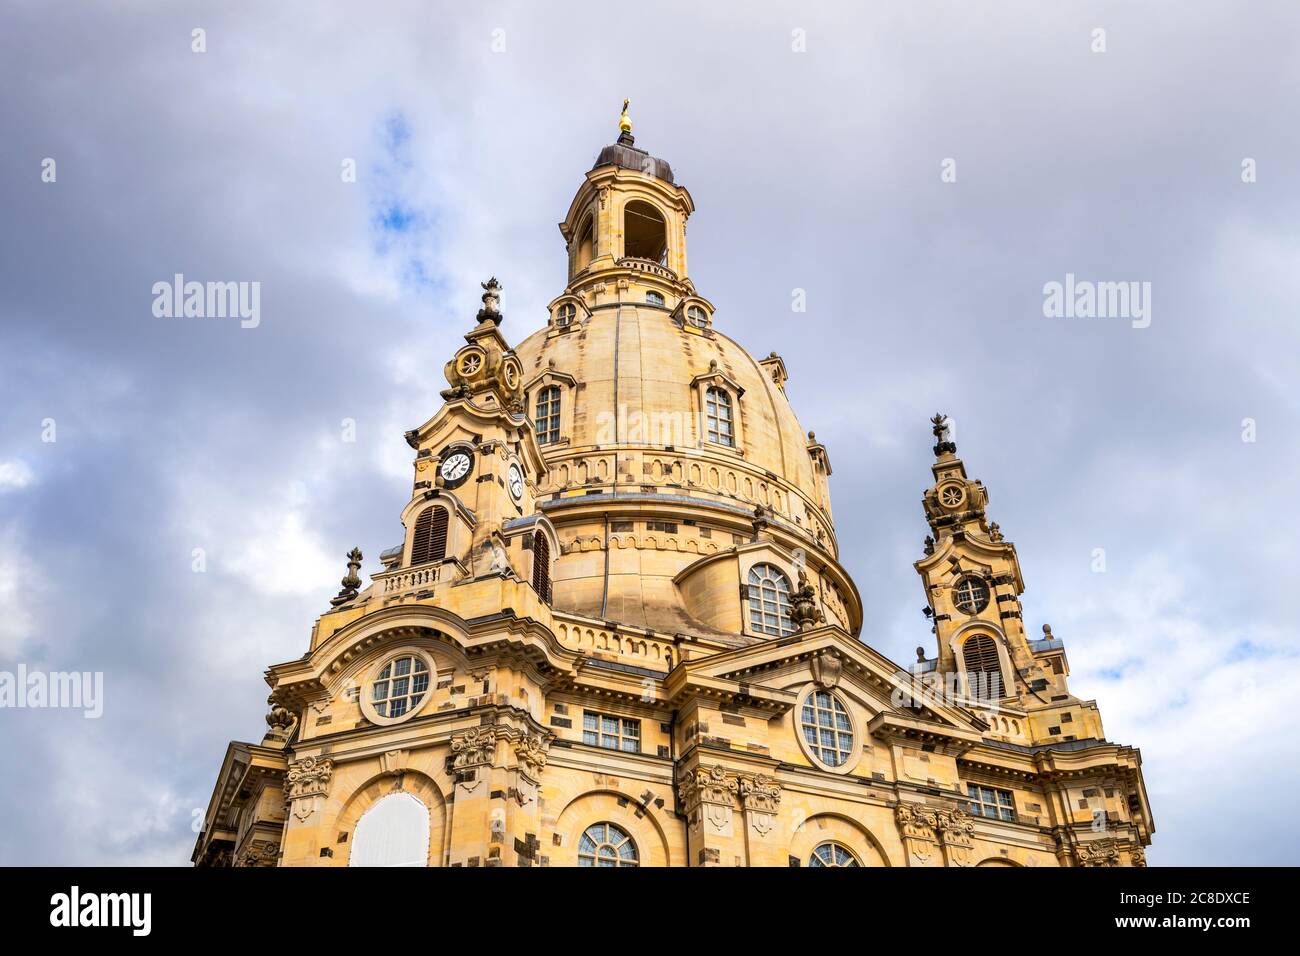 Germany, Saxony, Dresden, Low angle view of Dresden Frauenkirche Stock Photo